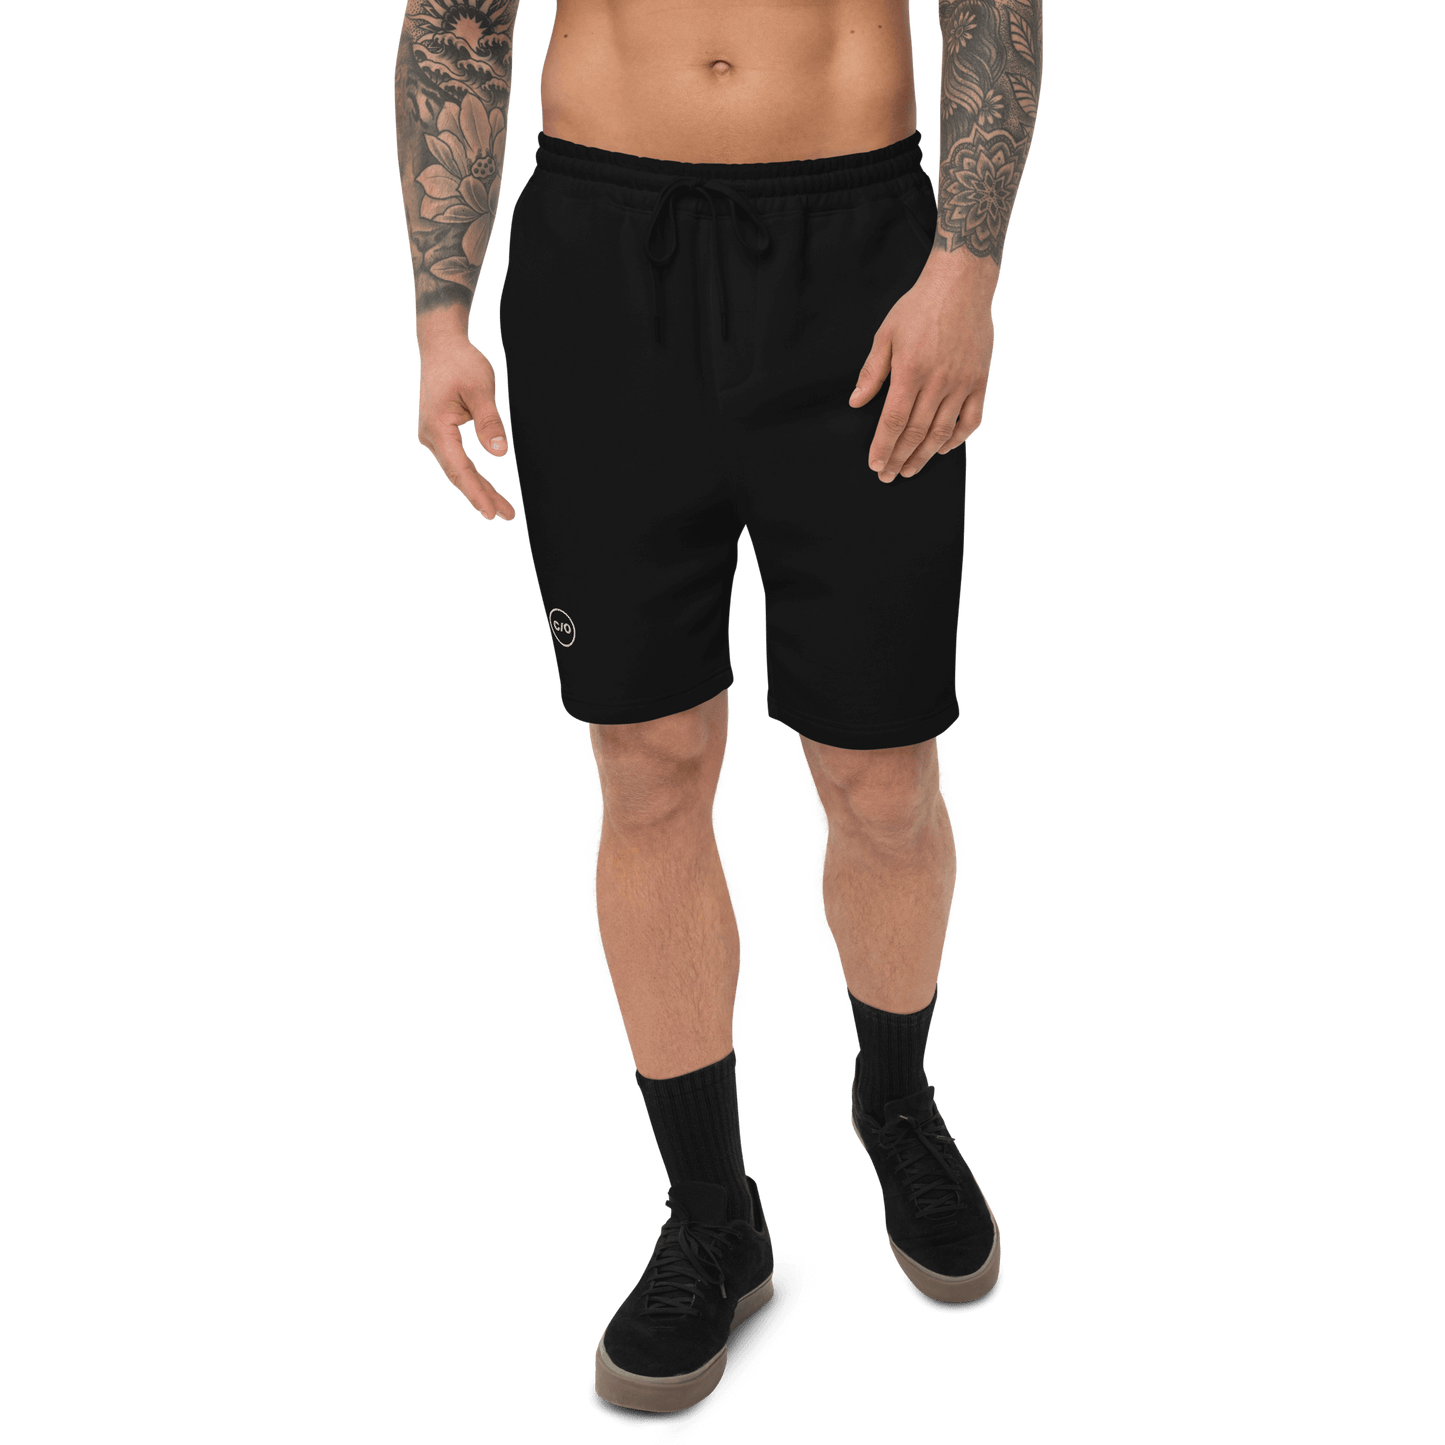 Man wearing Neue Supply Co. Men's Essential Fleece Sweat Shorts in Black. Front view of model on white background with black socks and shoes.